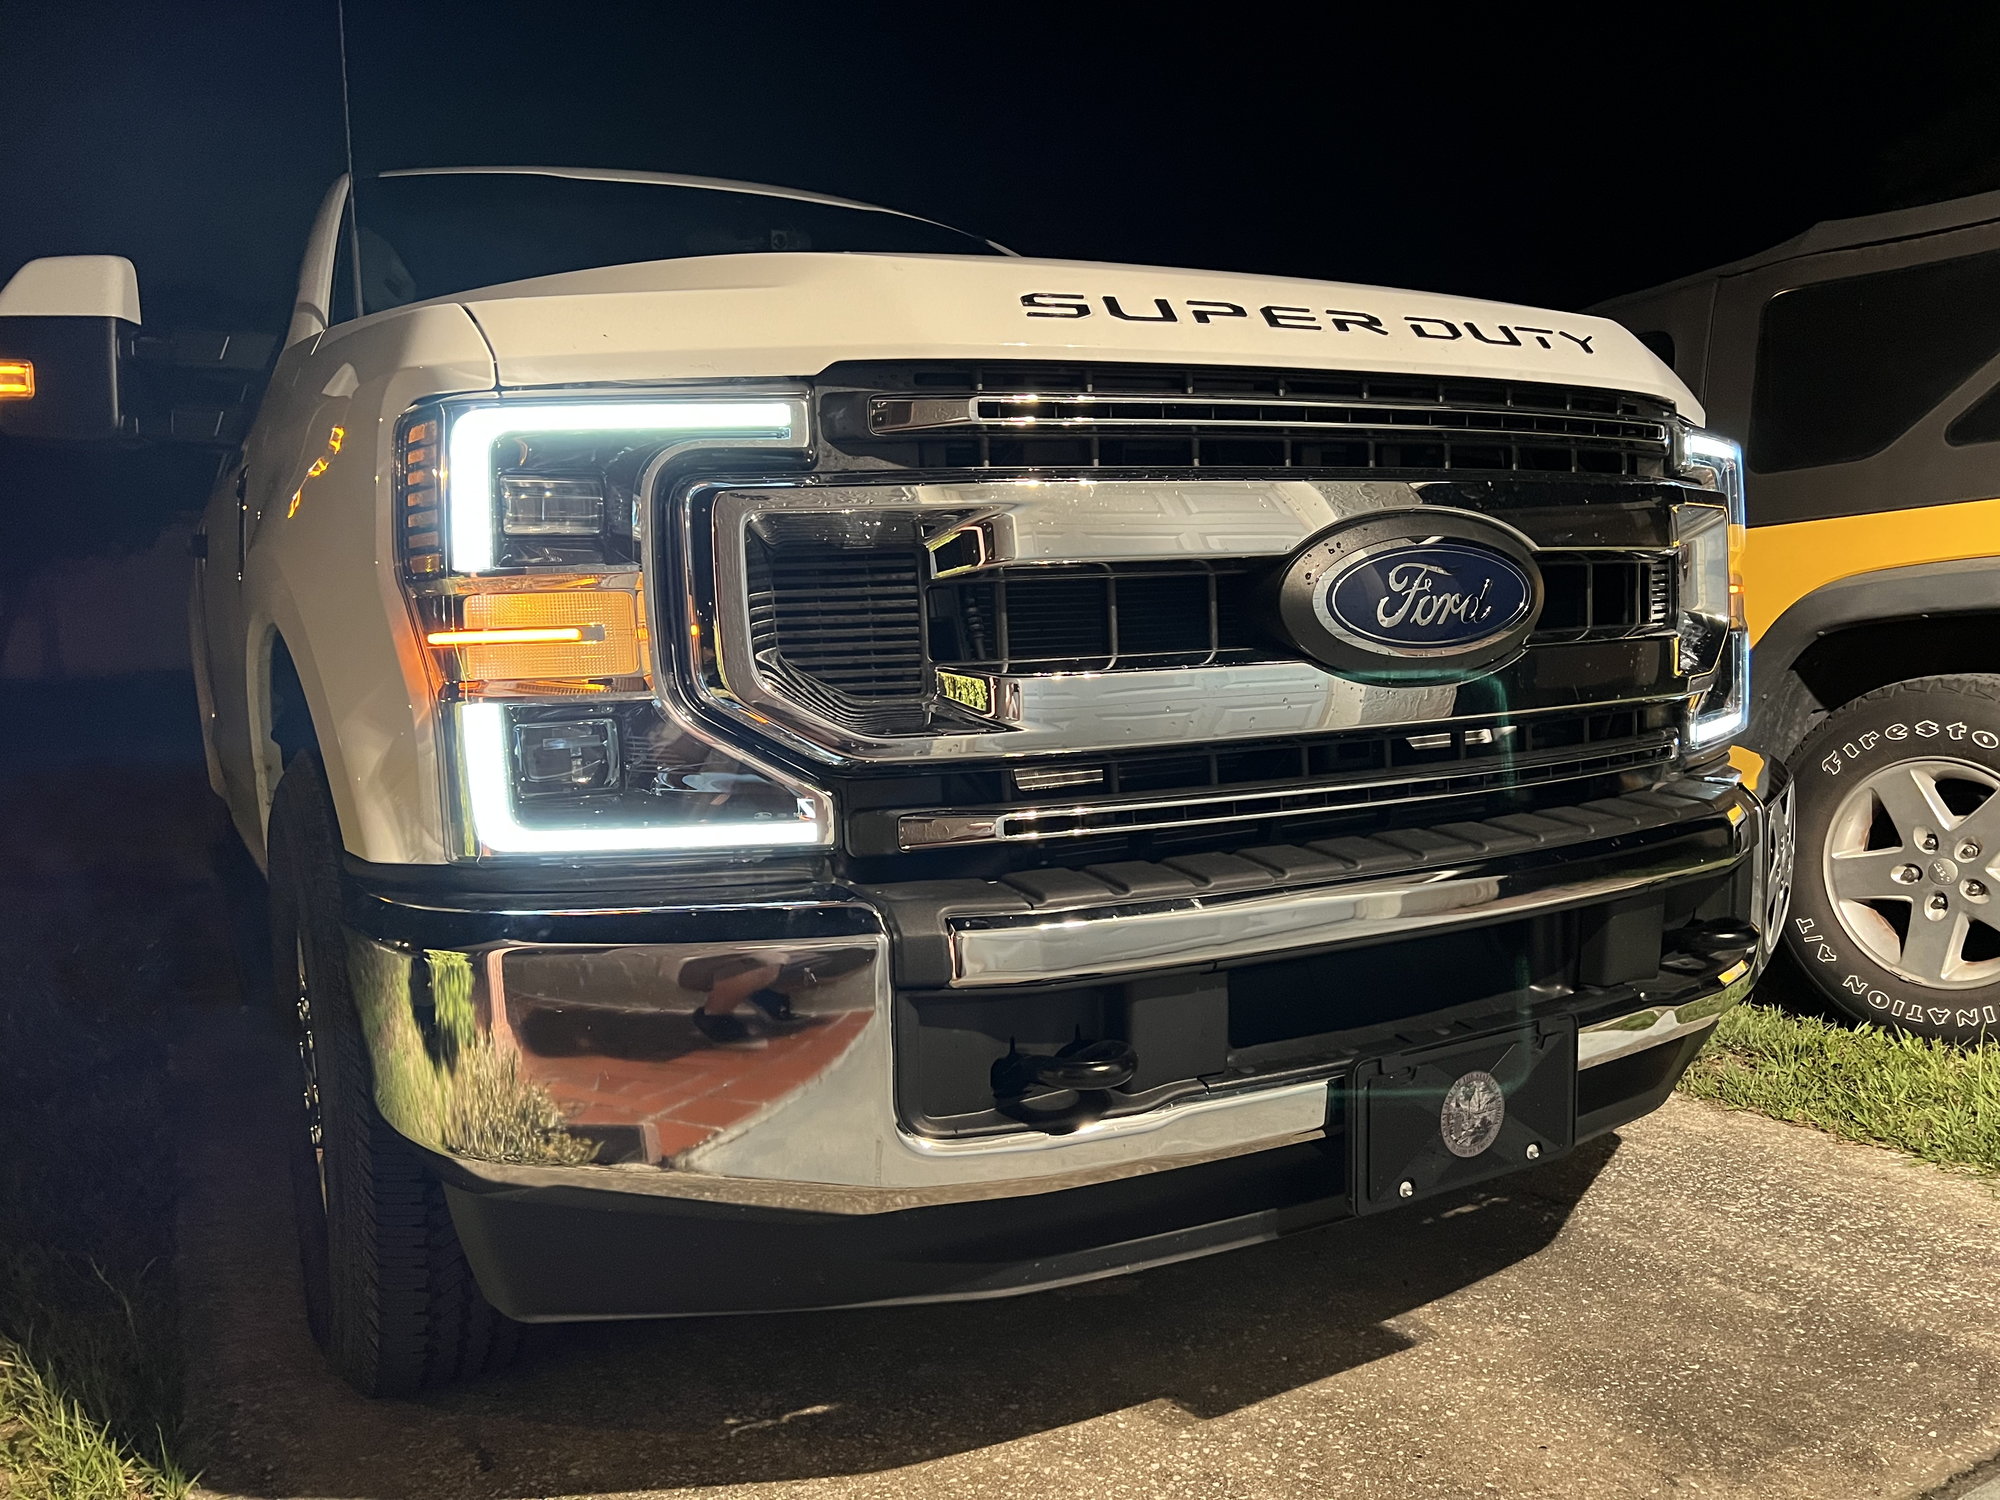 What are LED headlights and how do they work?